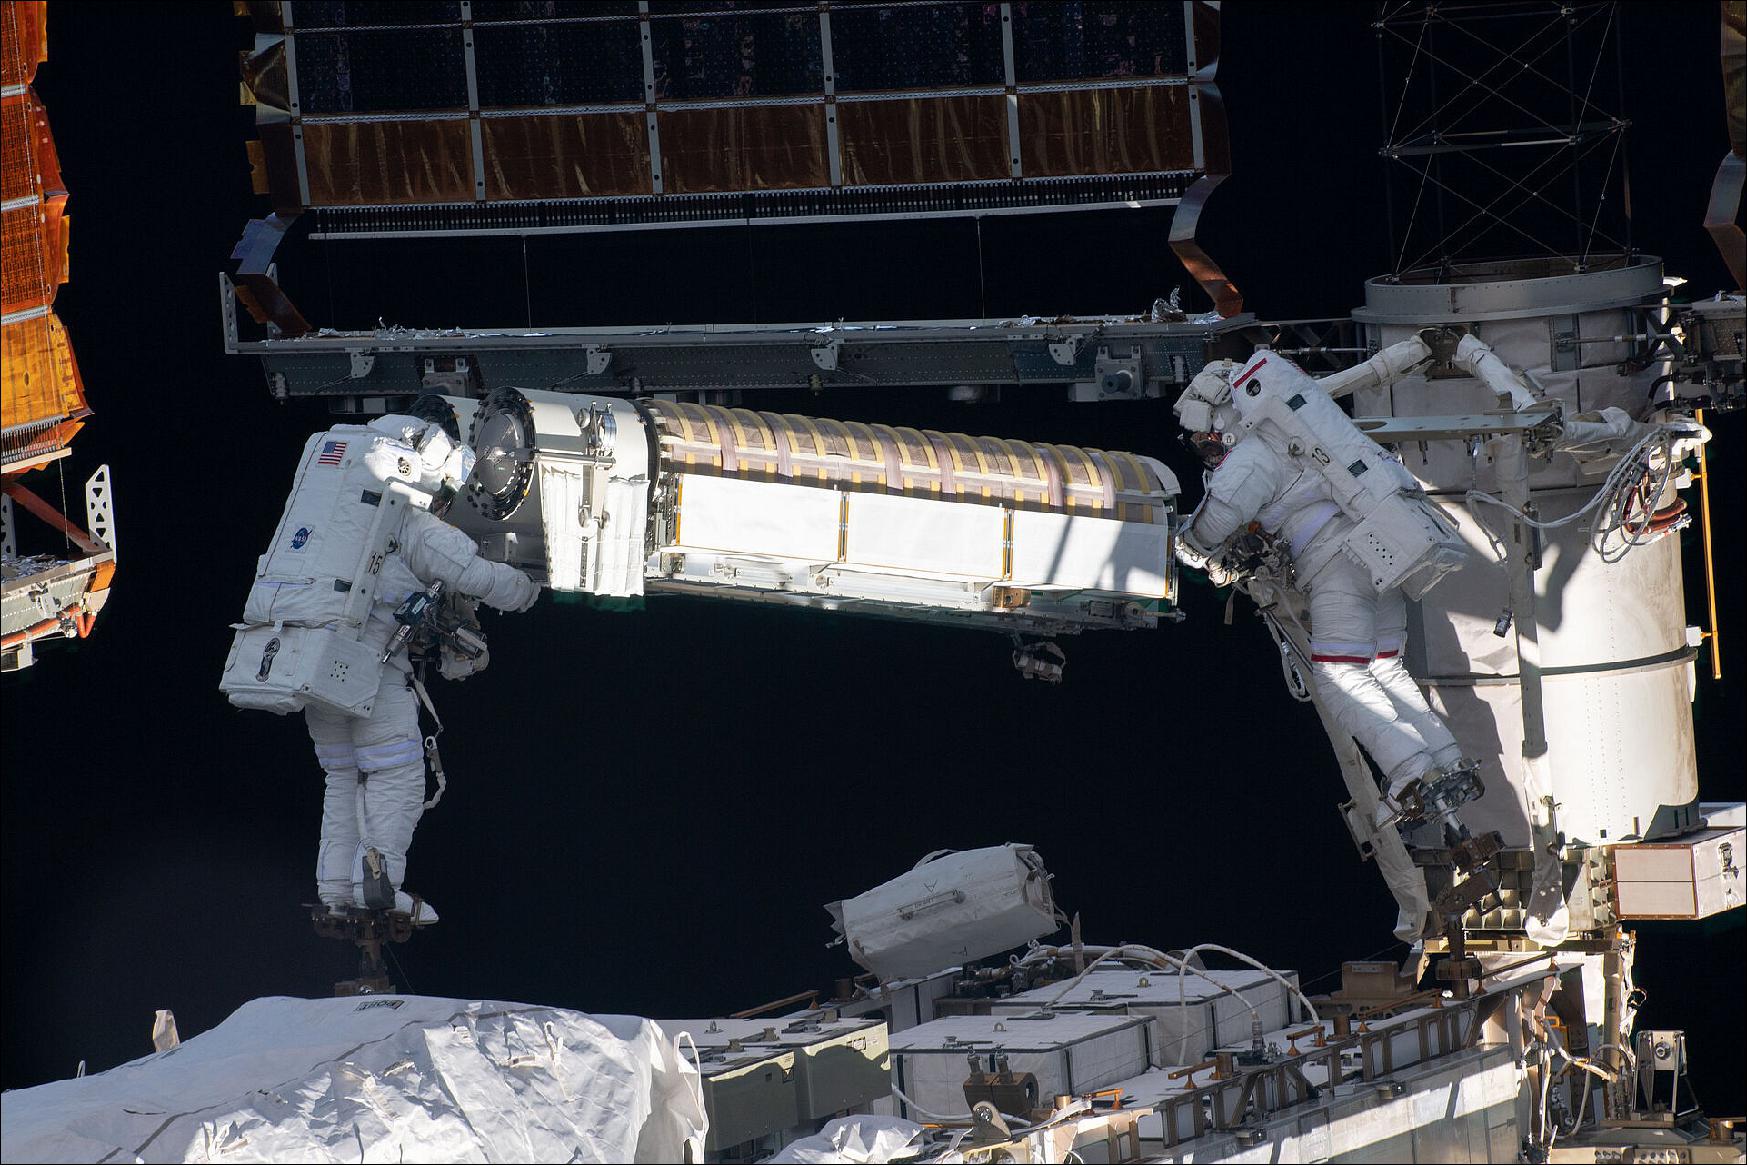 Figure 4: ESA astronaut Thomas Pesquet and NASA astronaut Shane Kimbrough performed three spacewalks in the span of 10 days to install two new solar arrays that will generate more electricity on the International Space Station. On the first spacewalk on 16 June 2021, Shane and Thomas collected the solar arrays, released them from their carrier and moved them to the installation site on the port side of the Station (image credit: ESA/NASA)